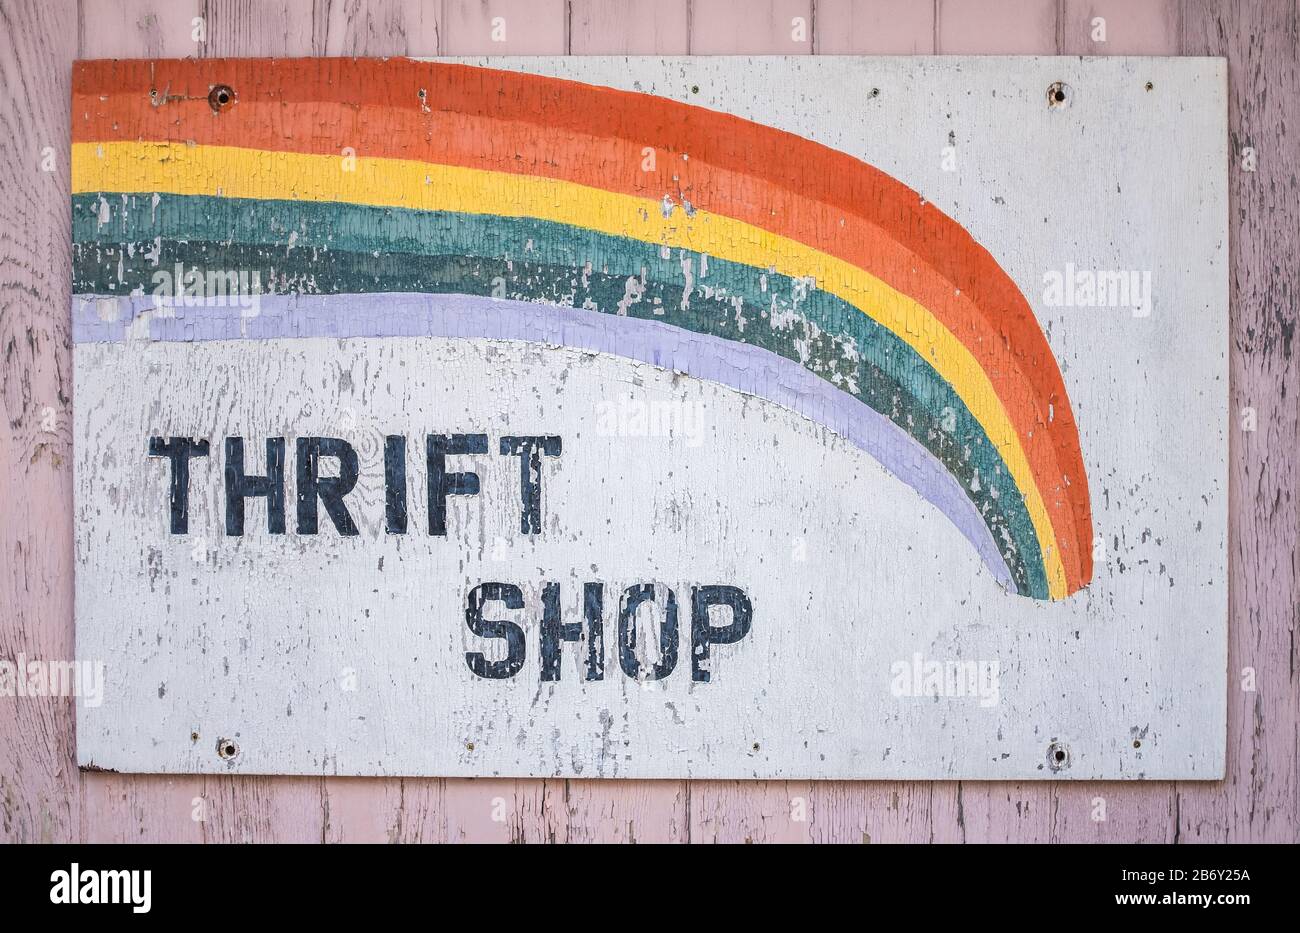 A Conceptual Recession Image Of An Old Sign For A Thrift Shop Stock Photo